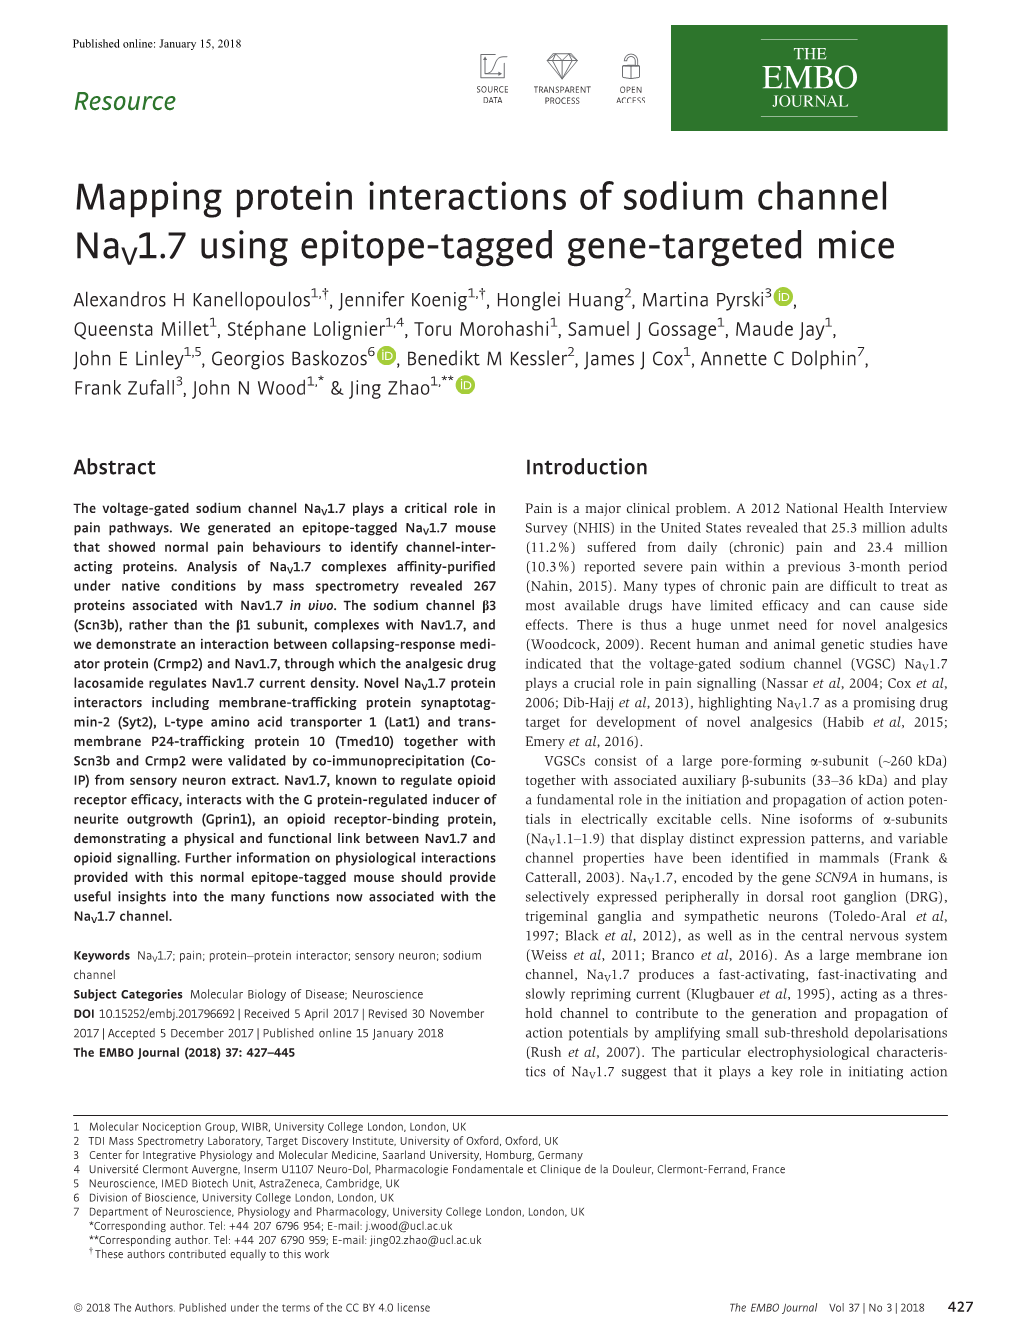 Mapping Protein Interactions of Sodium Channel